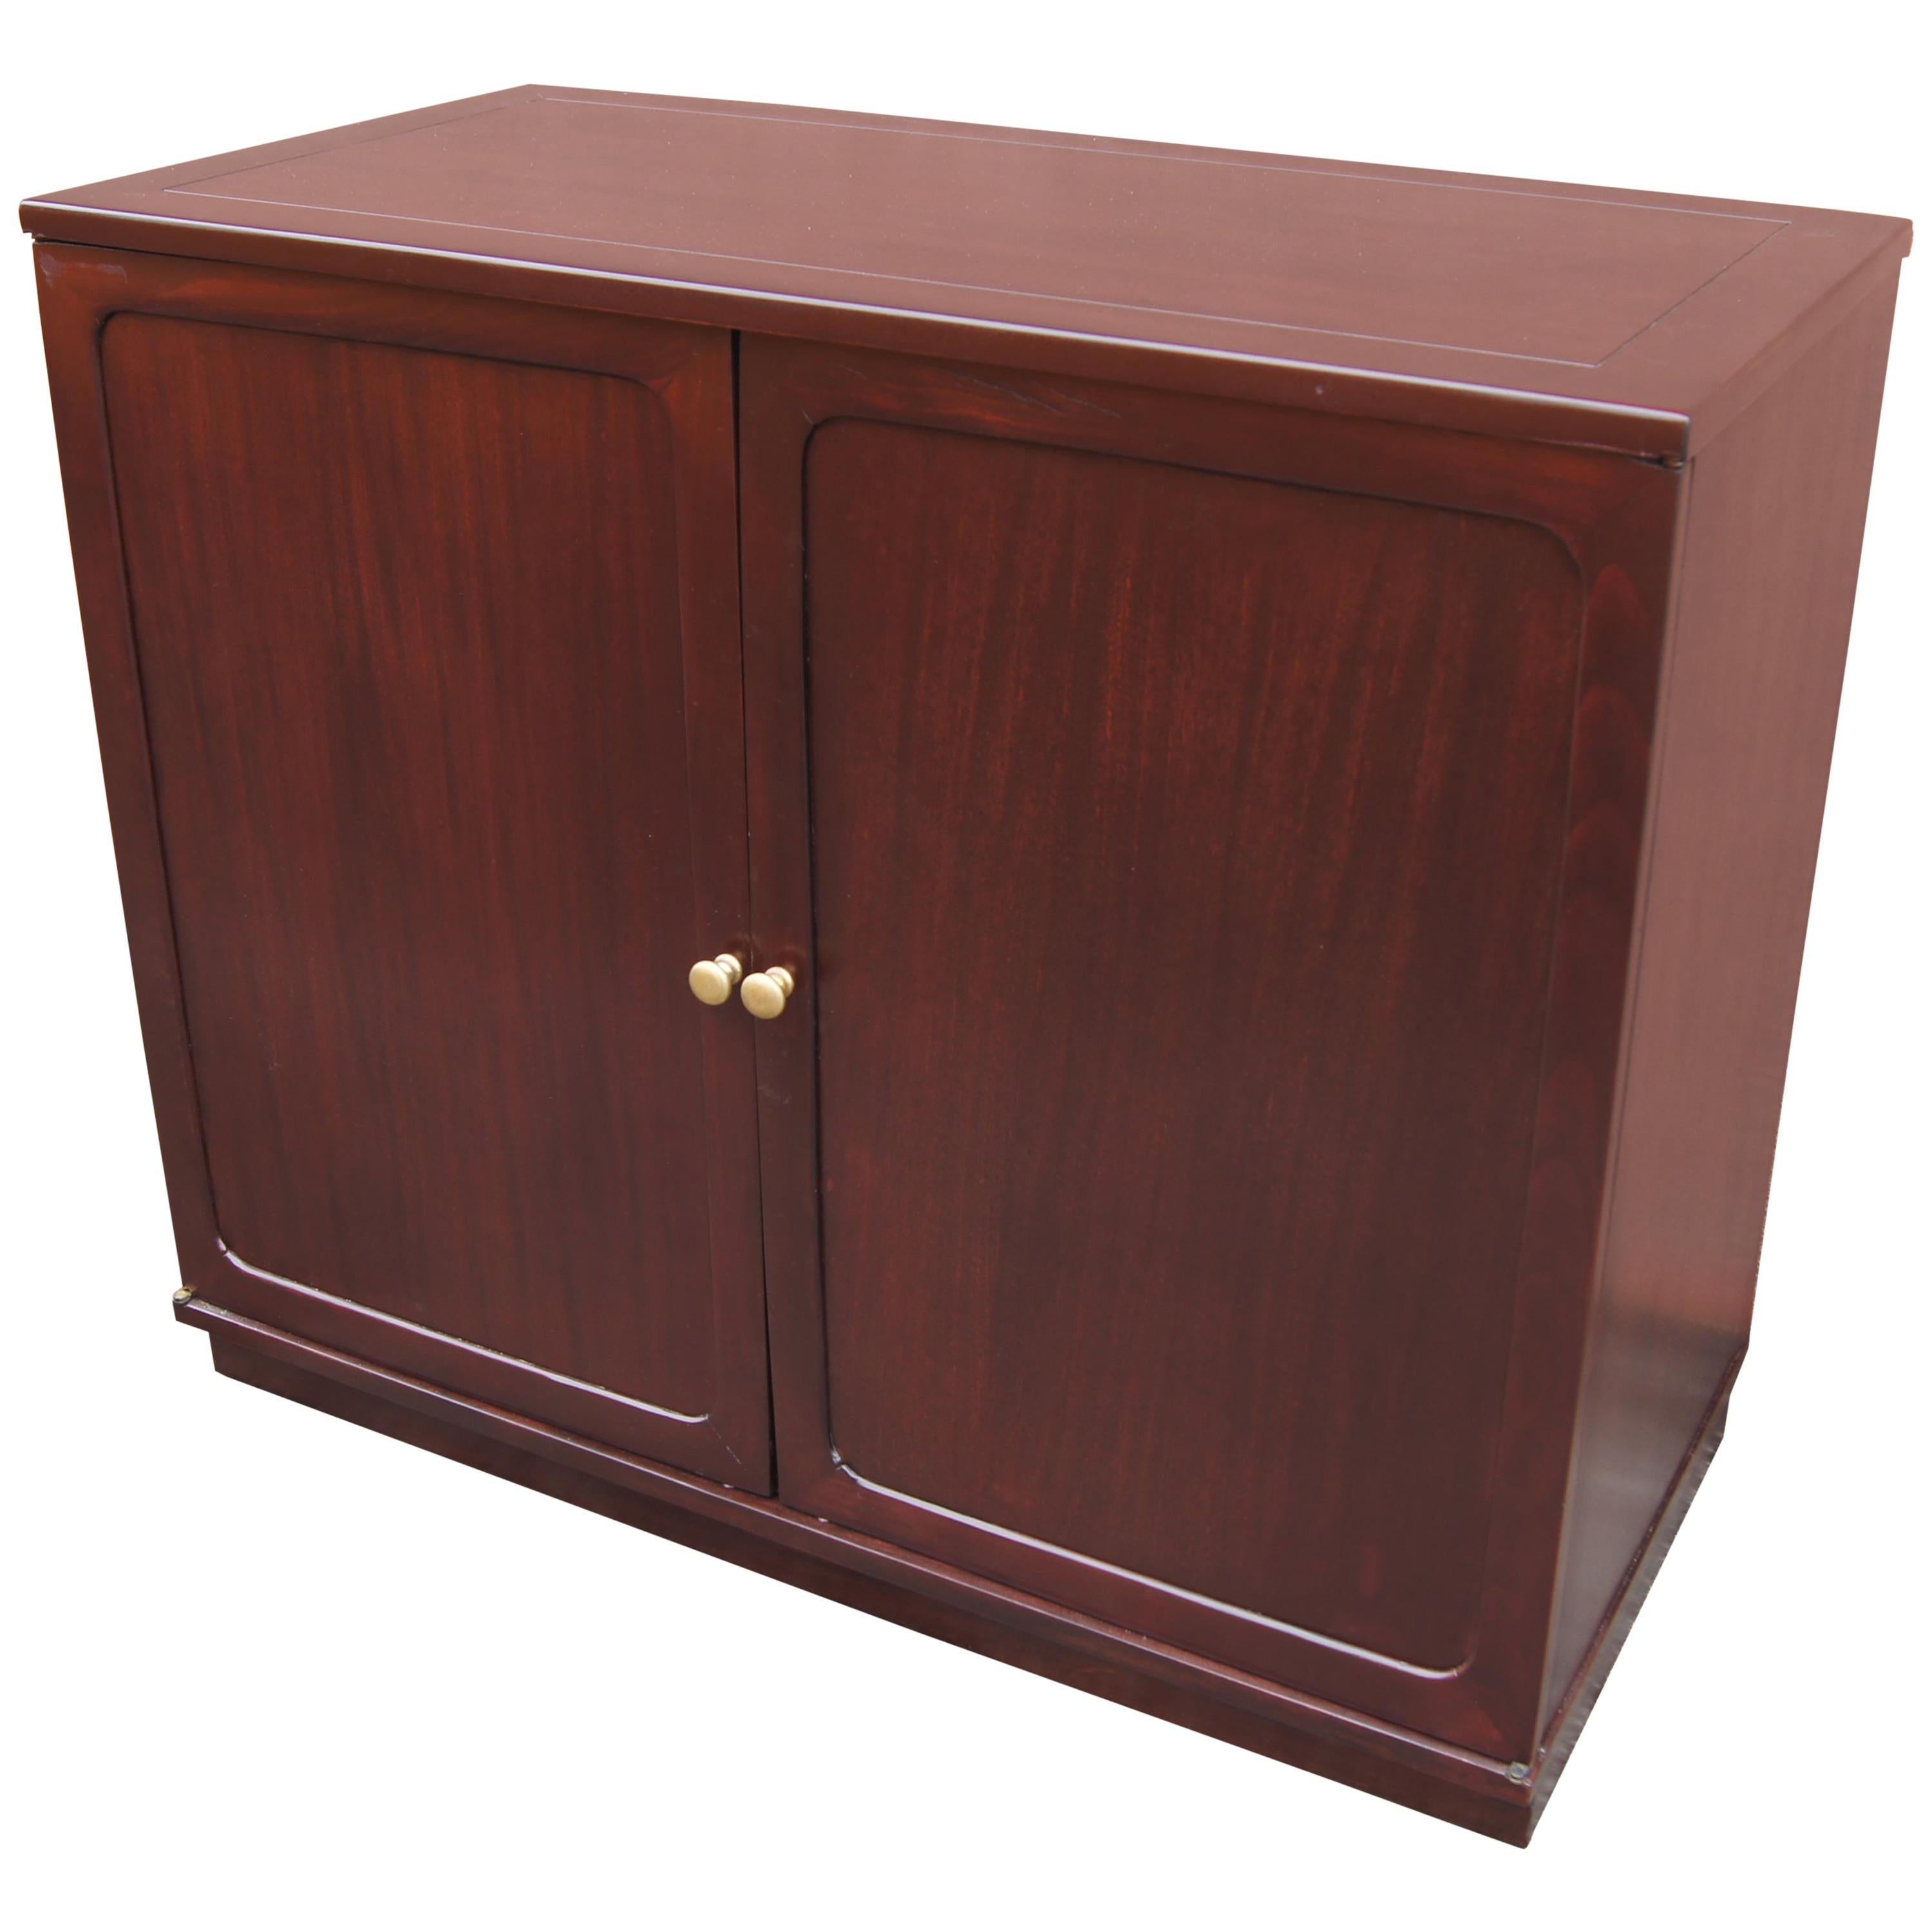 Small Precedent Cabinet by Drexel